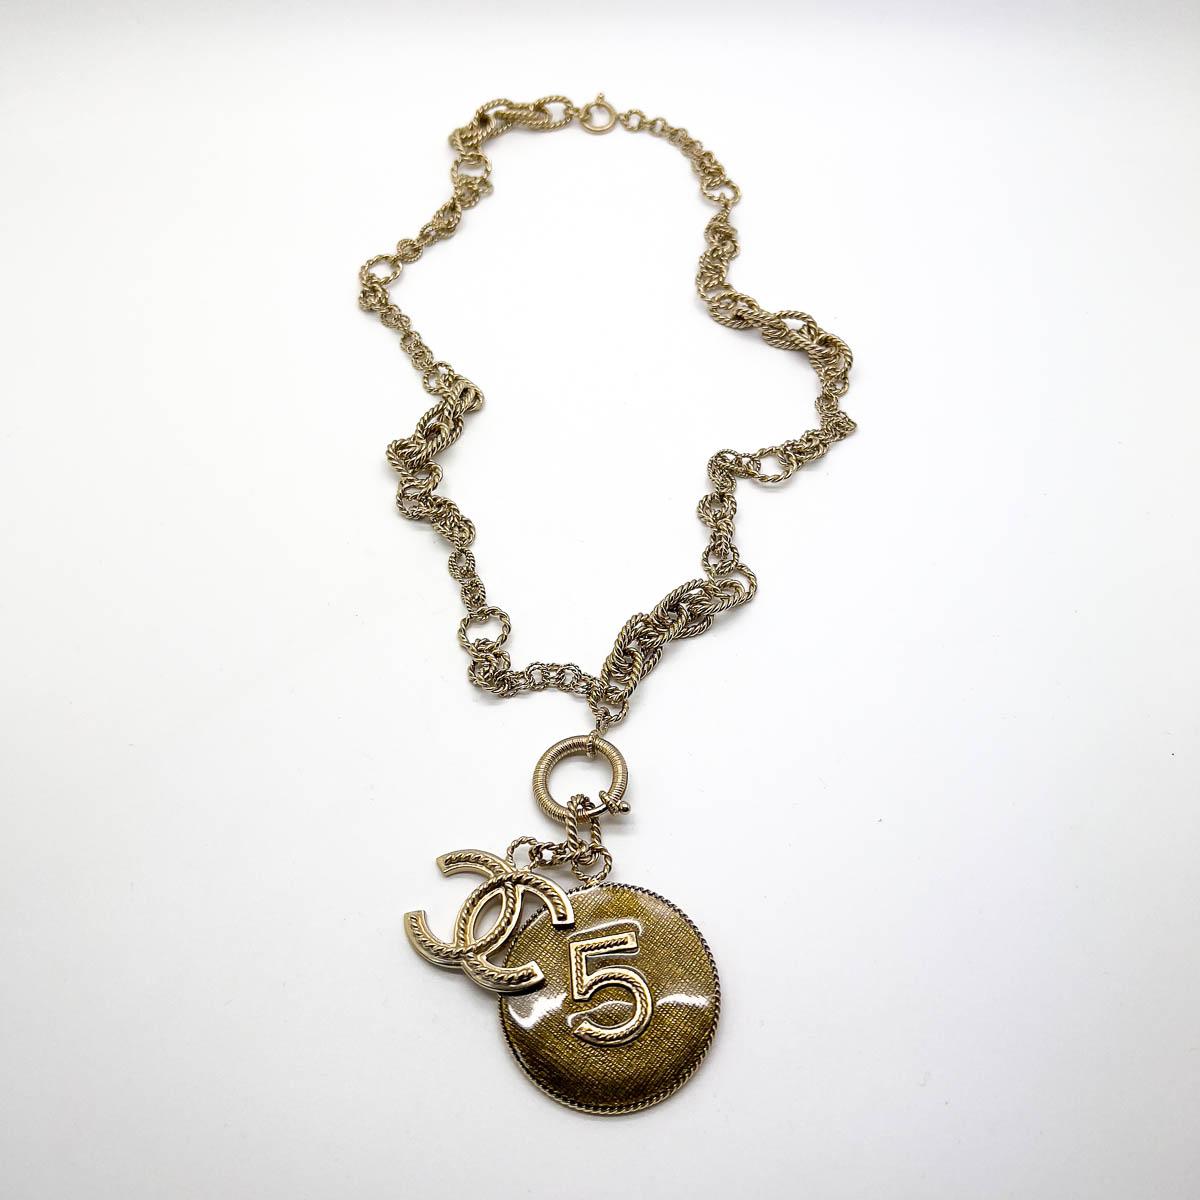 Vintage Chanel No. 5 Rope Chain Charm Necklace 2013 For Sale 3